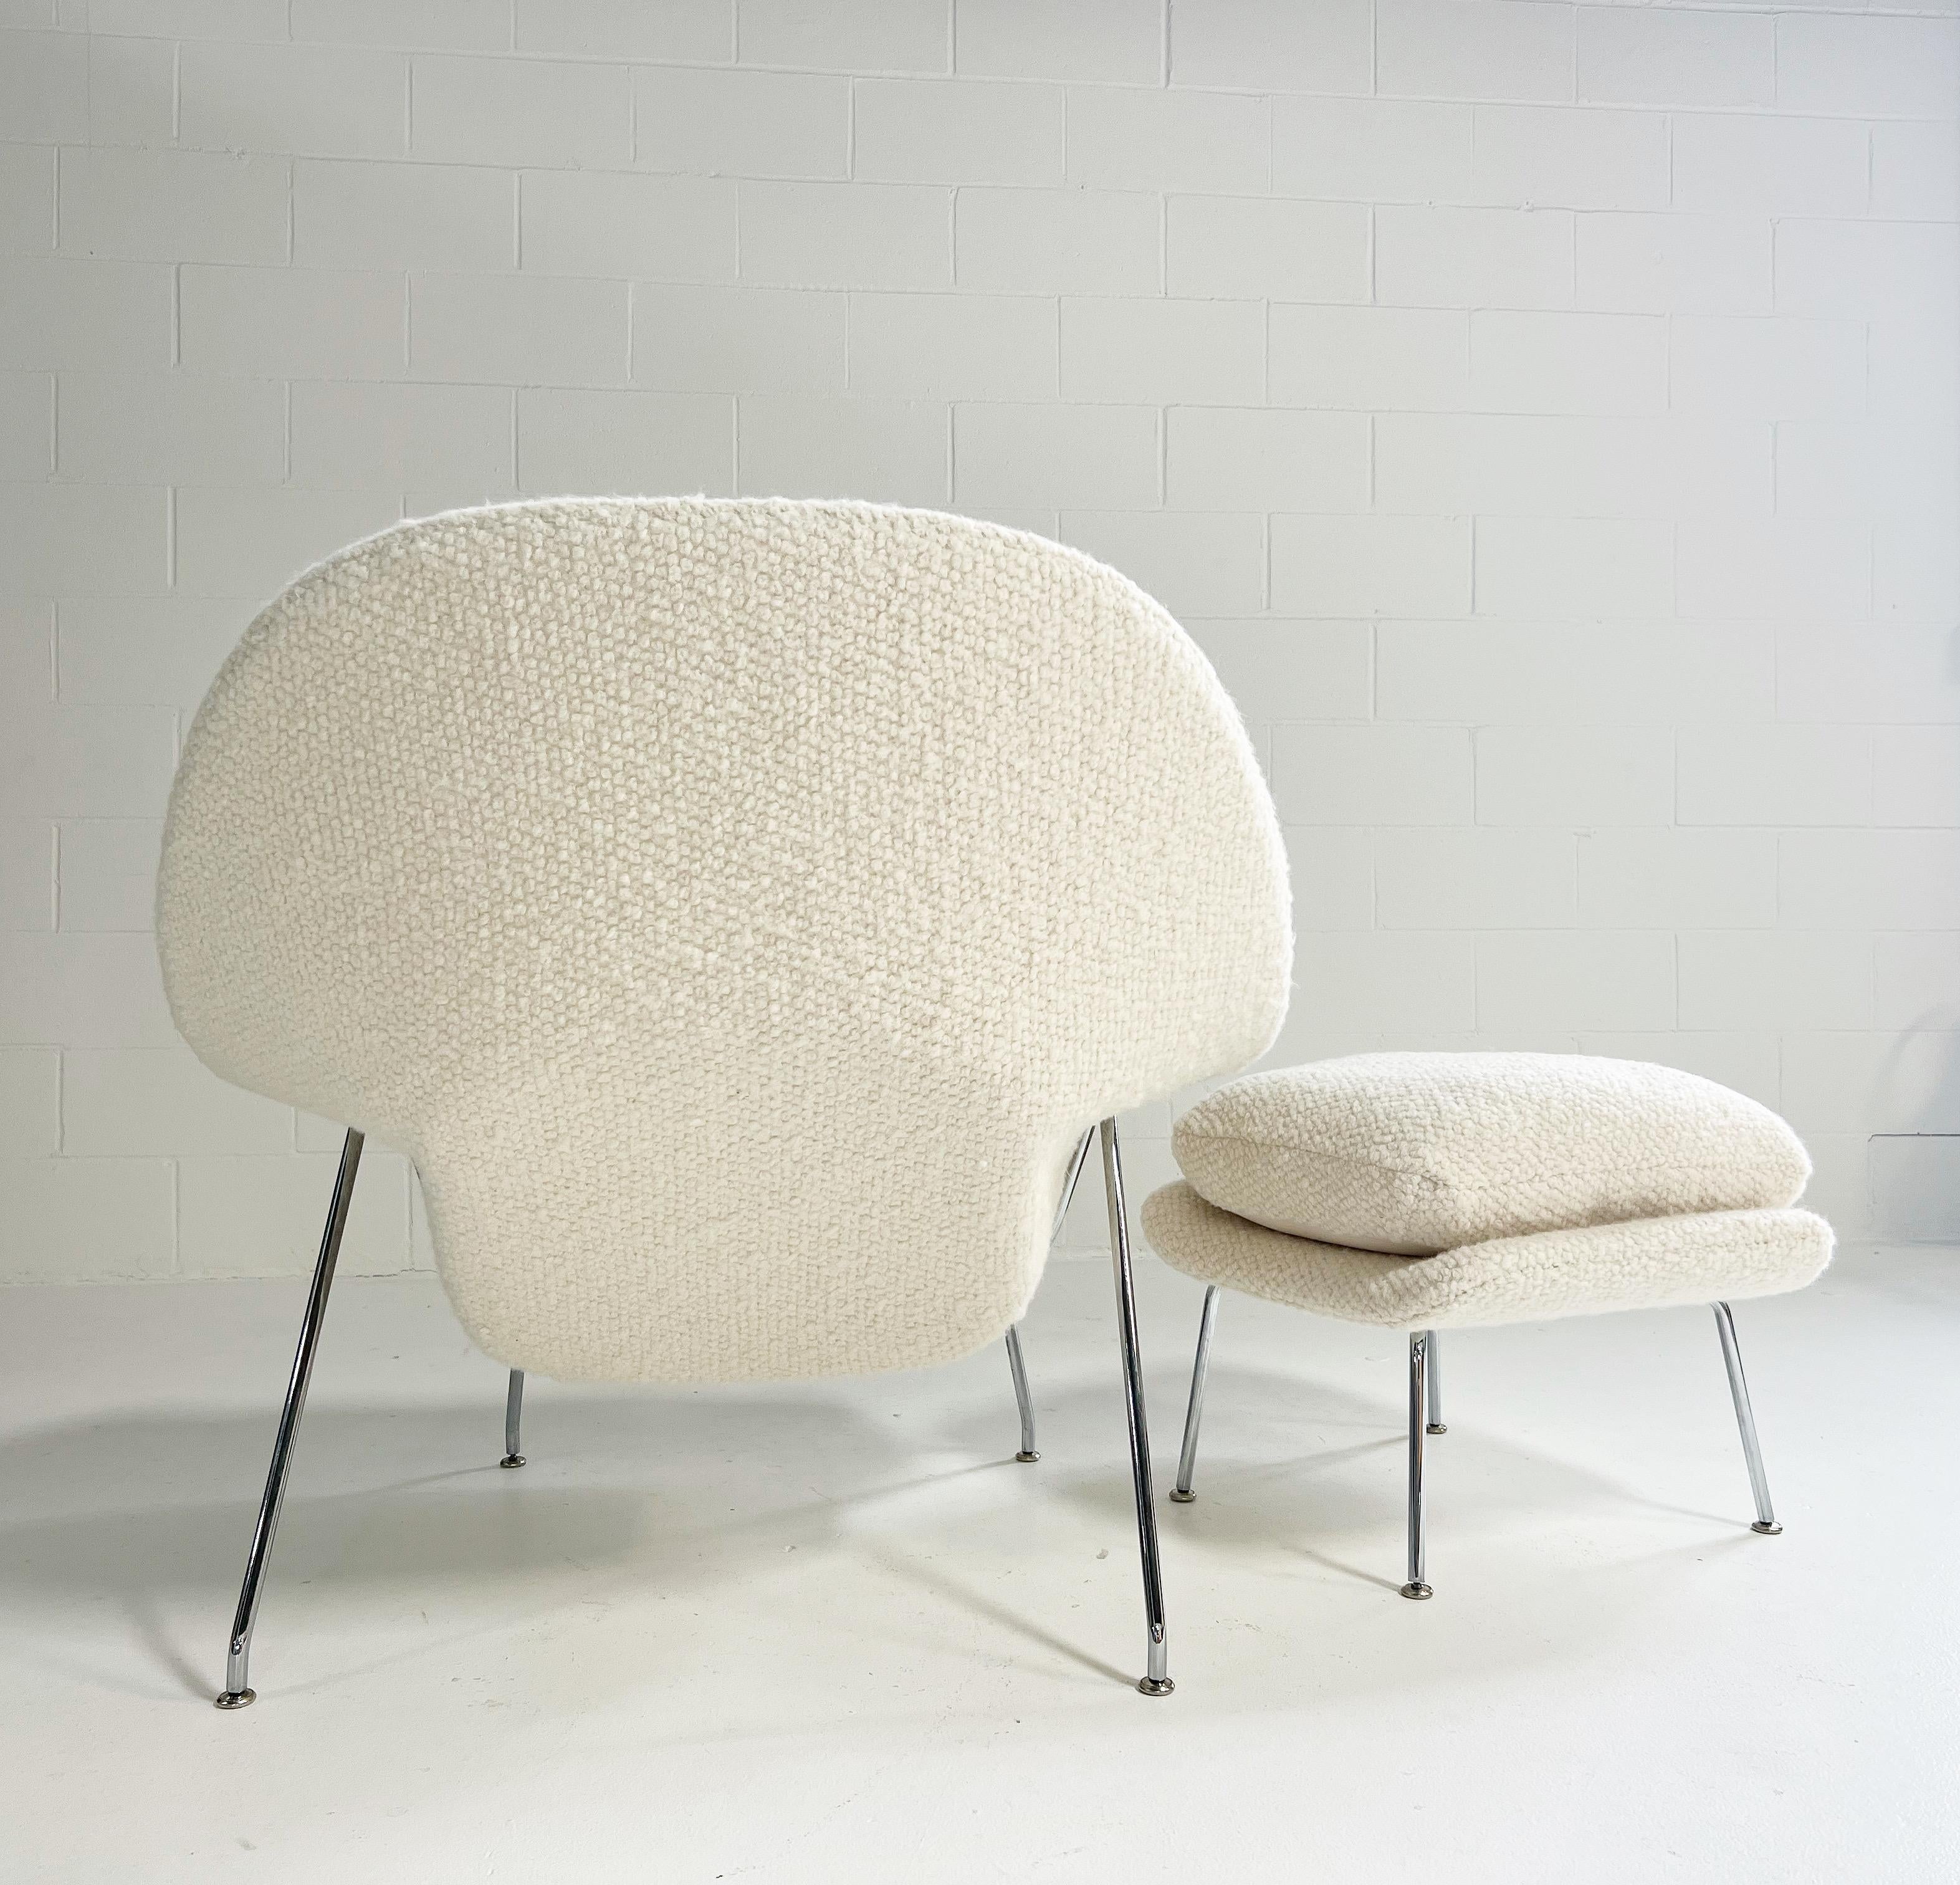 Lead Time: Please allow 10 to 12 weeks to restore a vintage Womb Chair and Ottoman in Dedar Boucle.

